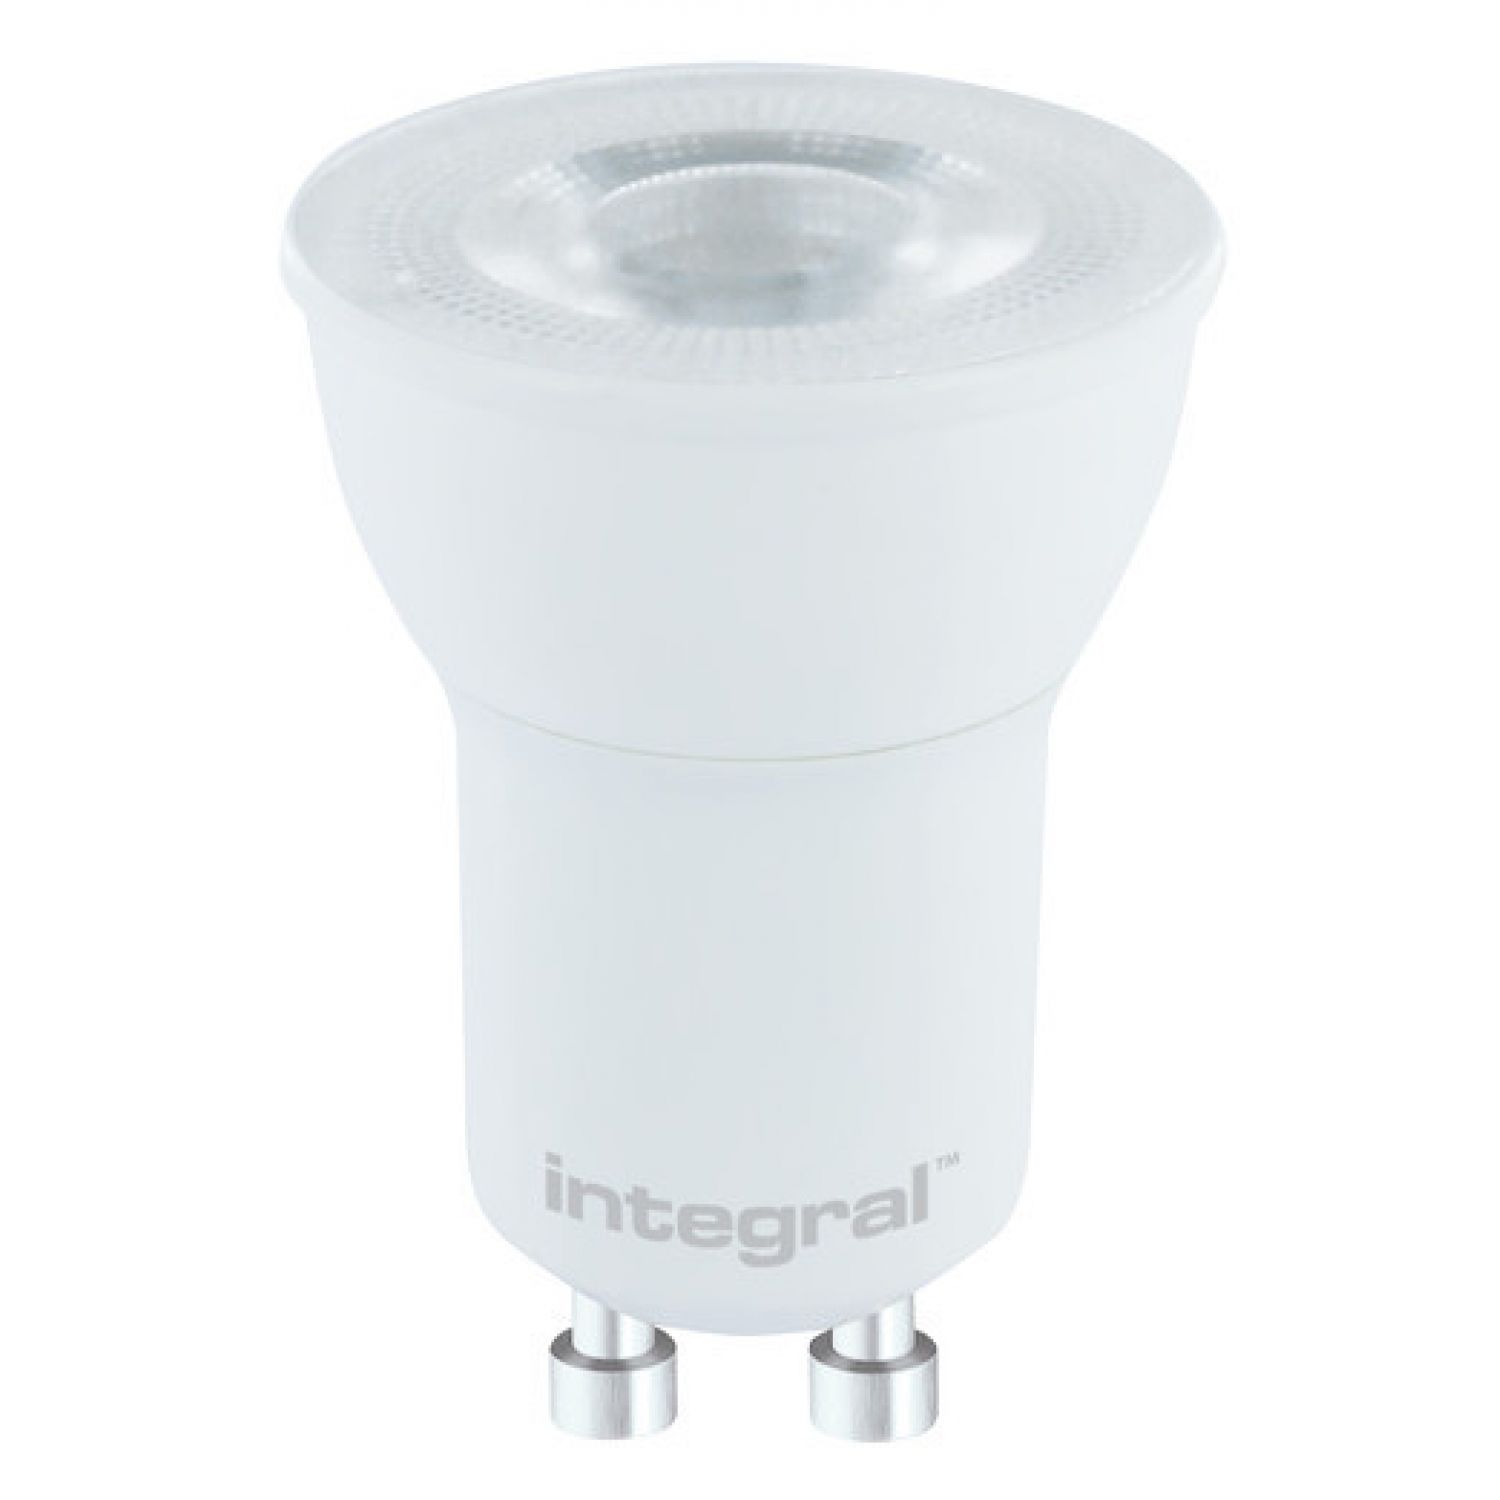 Integral ILMR11NC007: 35mm 3w LED GU10 Bulb, 2700K, non dimmable, 300lm =40w, 36° beam - from